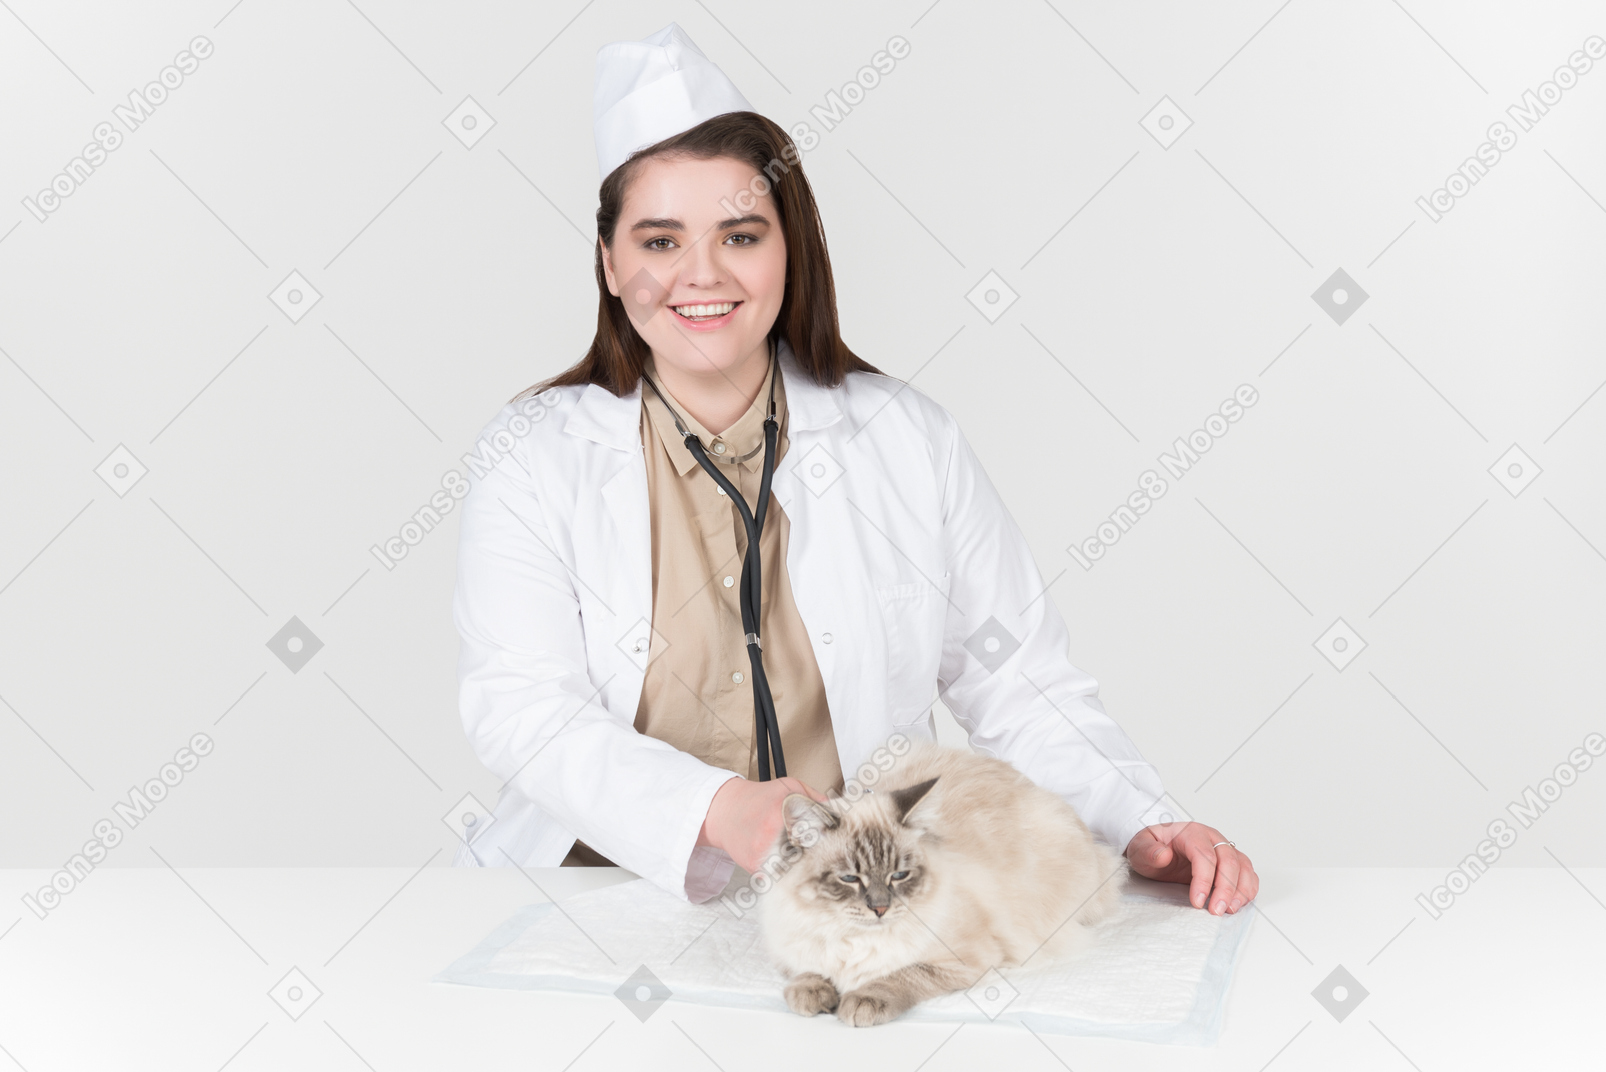 Exams showed that cat is healthy and completely ok